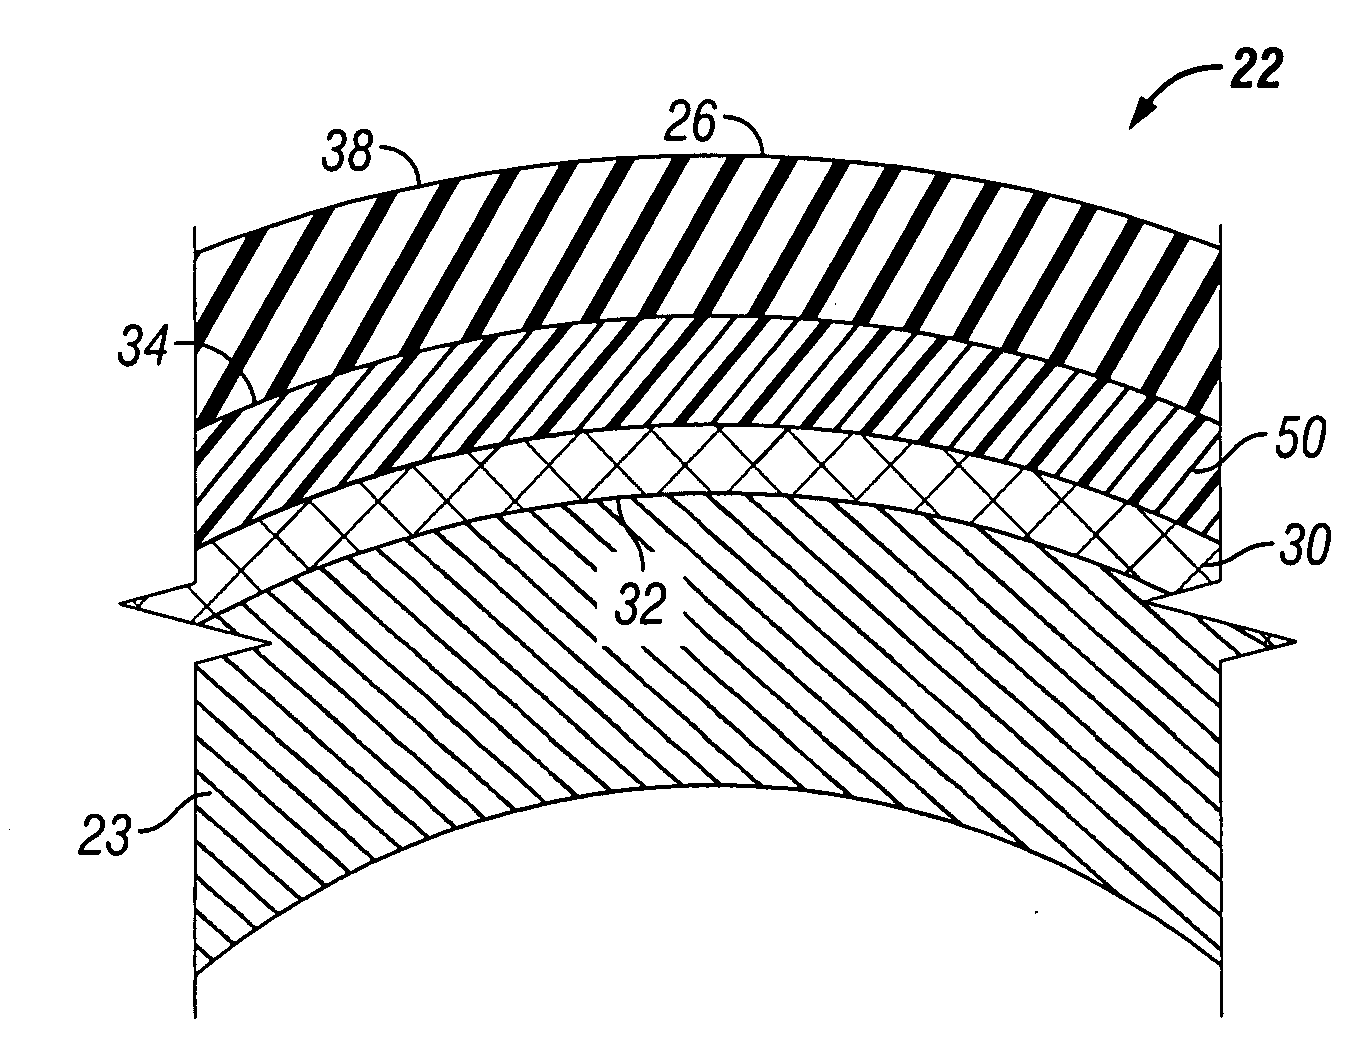 Sealing material to metal bonding compositions and methods for bonding a sealing material to a metal surface